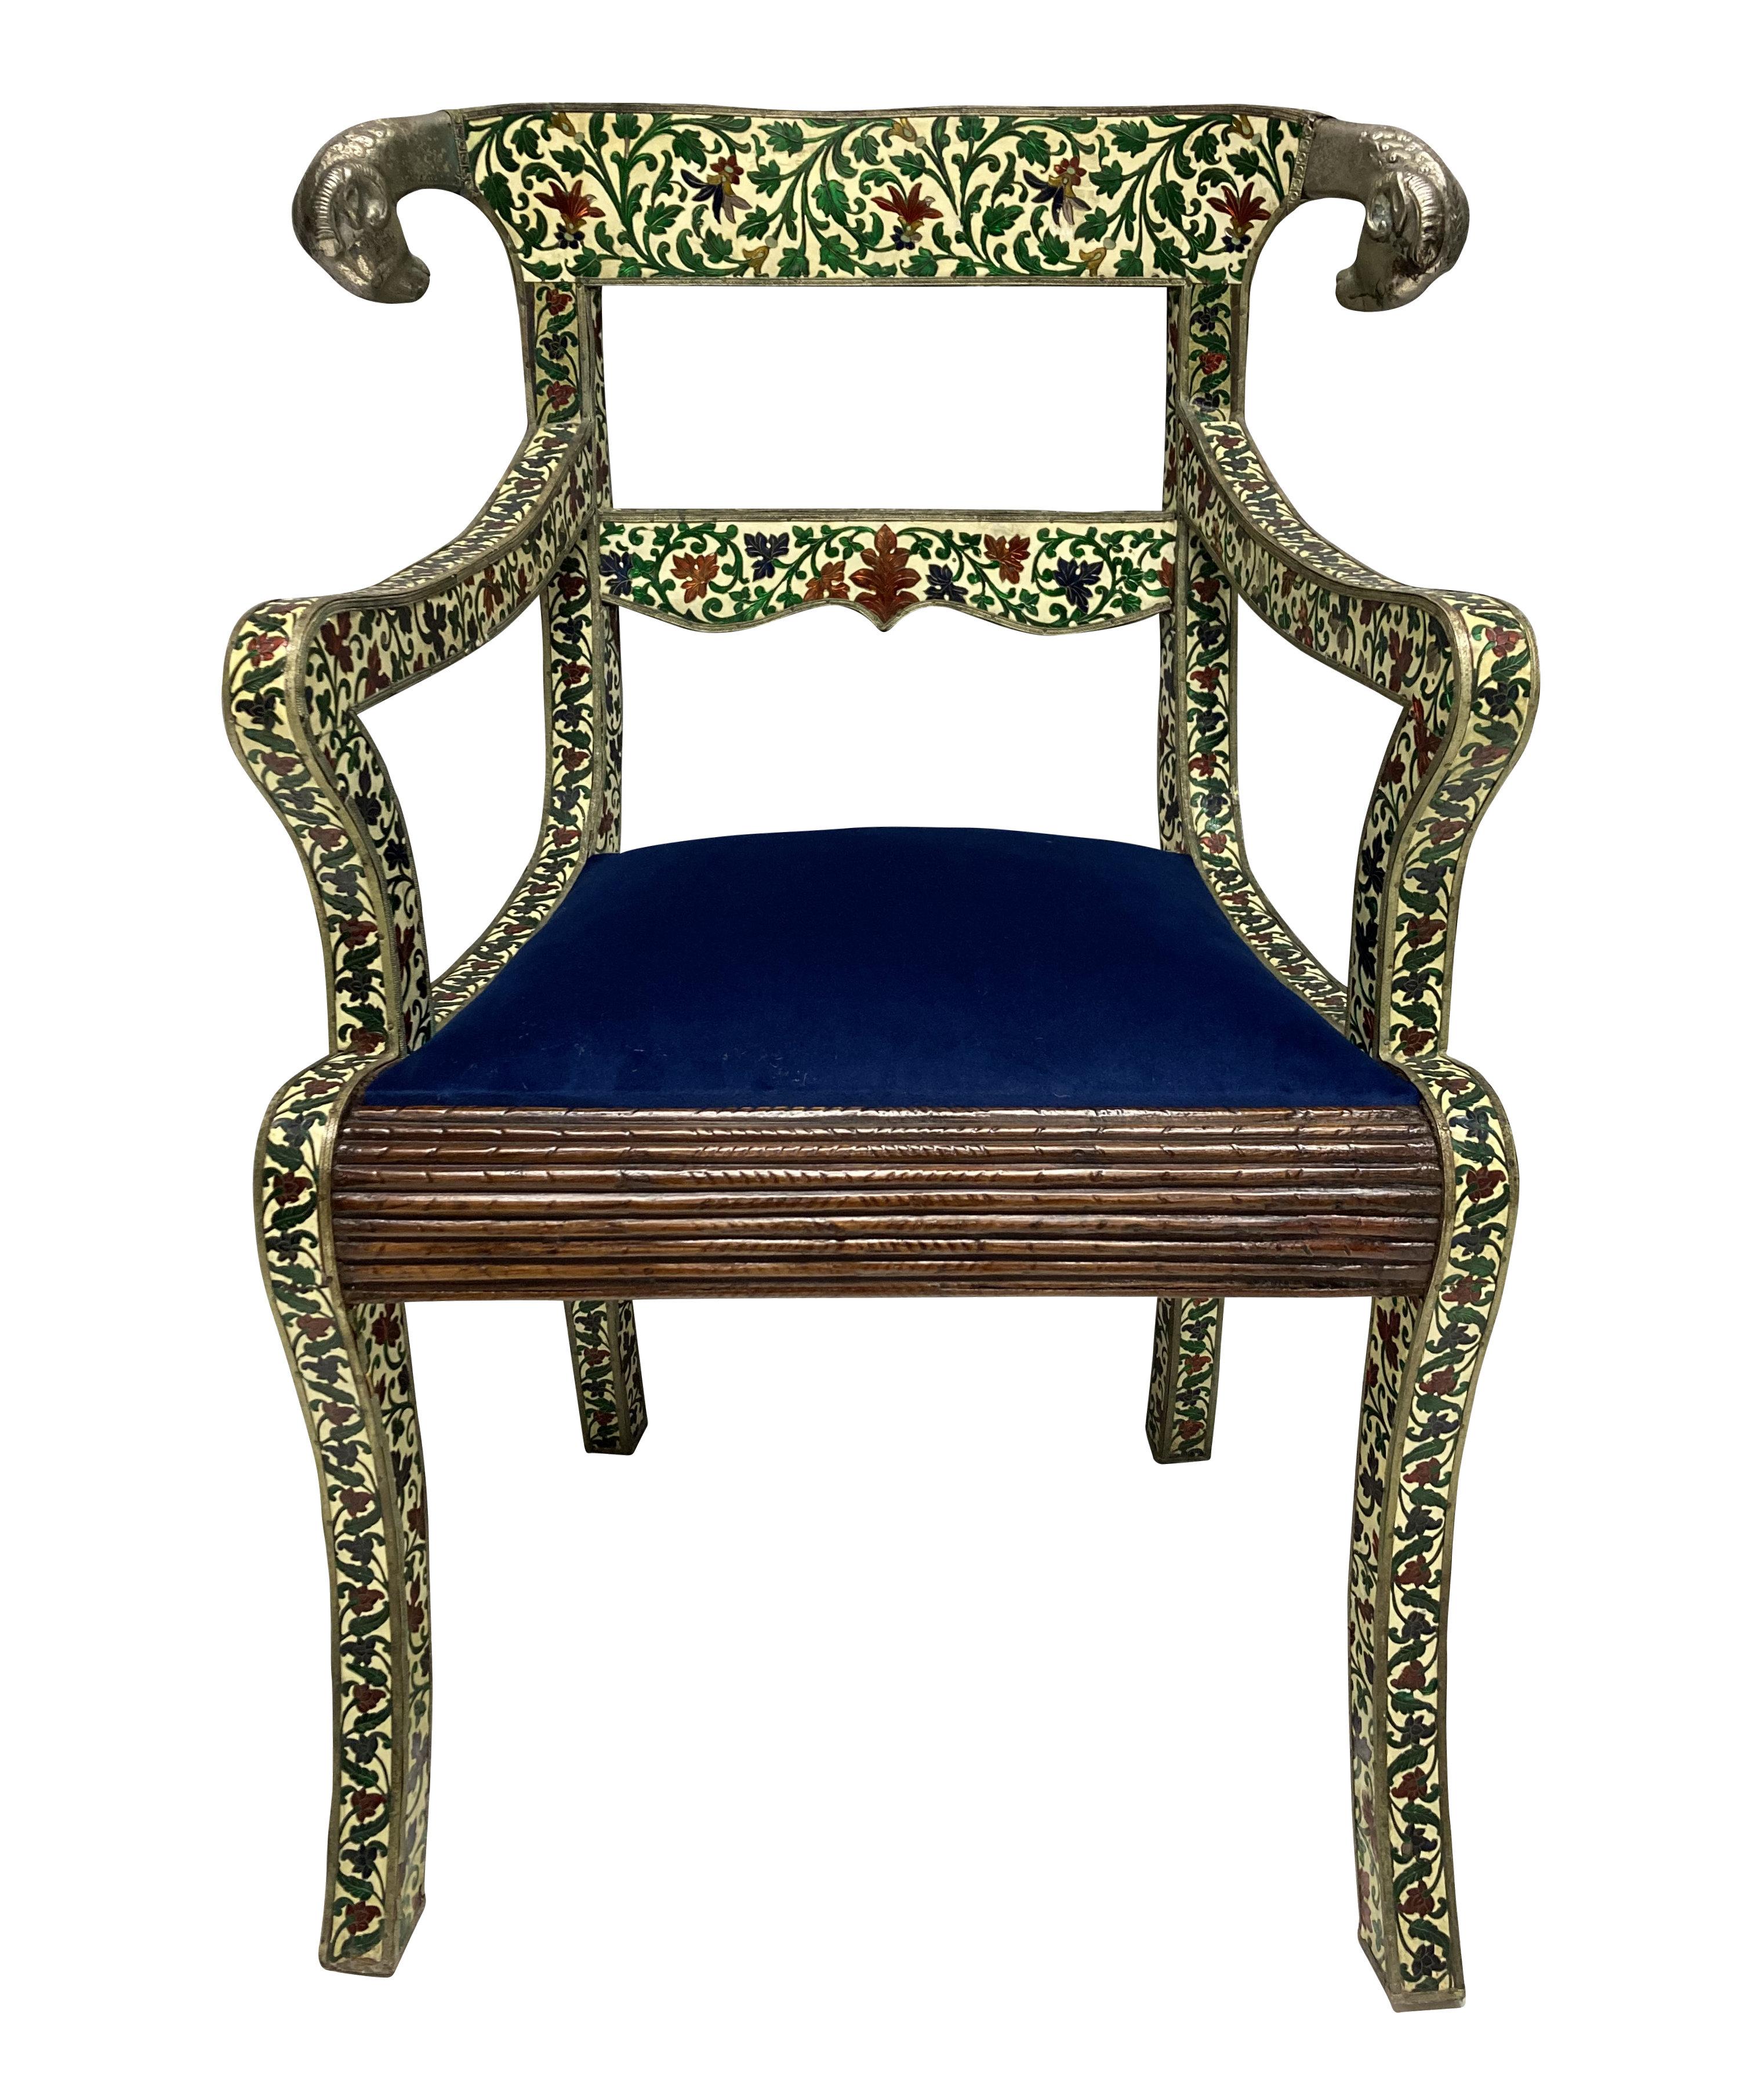 Pair of Rare Indian Cloisonne & Silver Armchairs For Sale 1